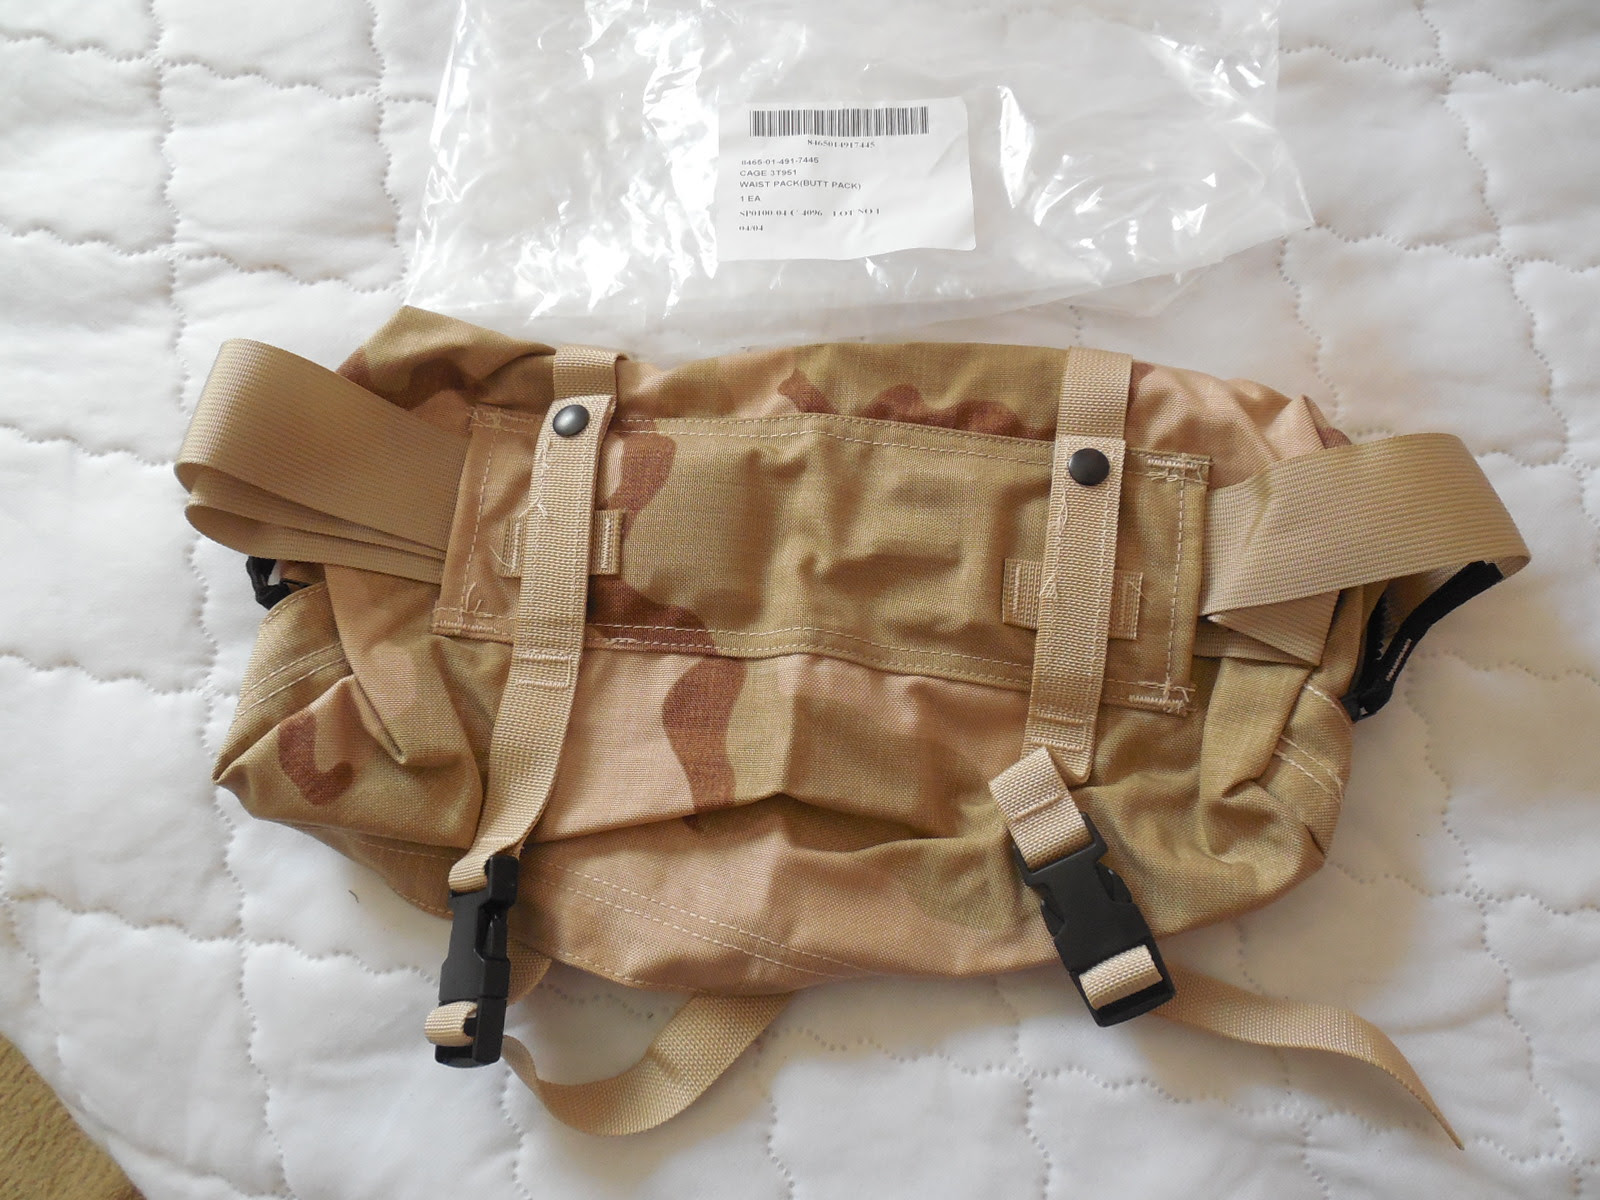 US Military Issued ACU Molle Waist Pack Butt Pack 8465-01-524-7263 EXCELLENT 